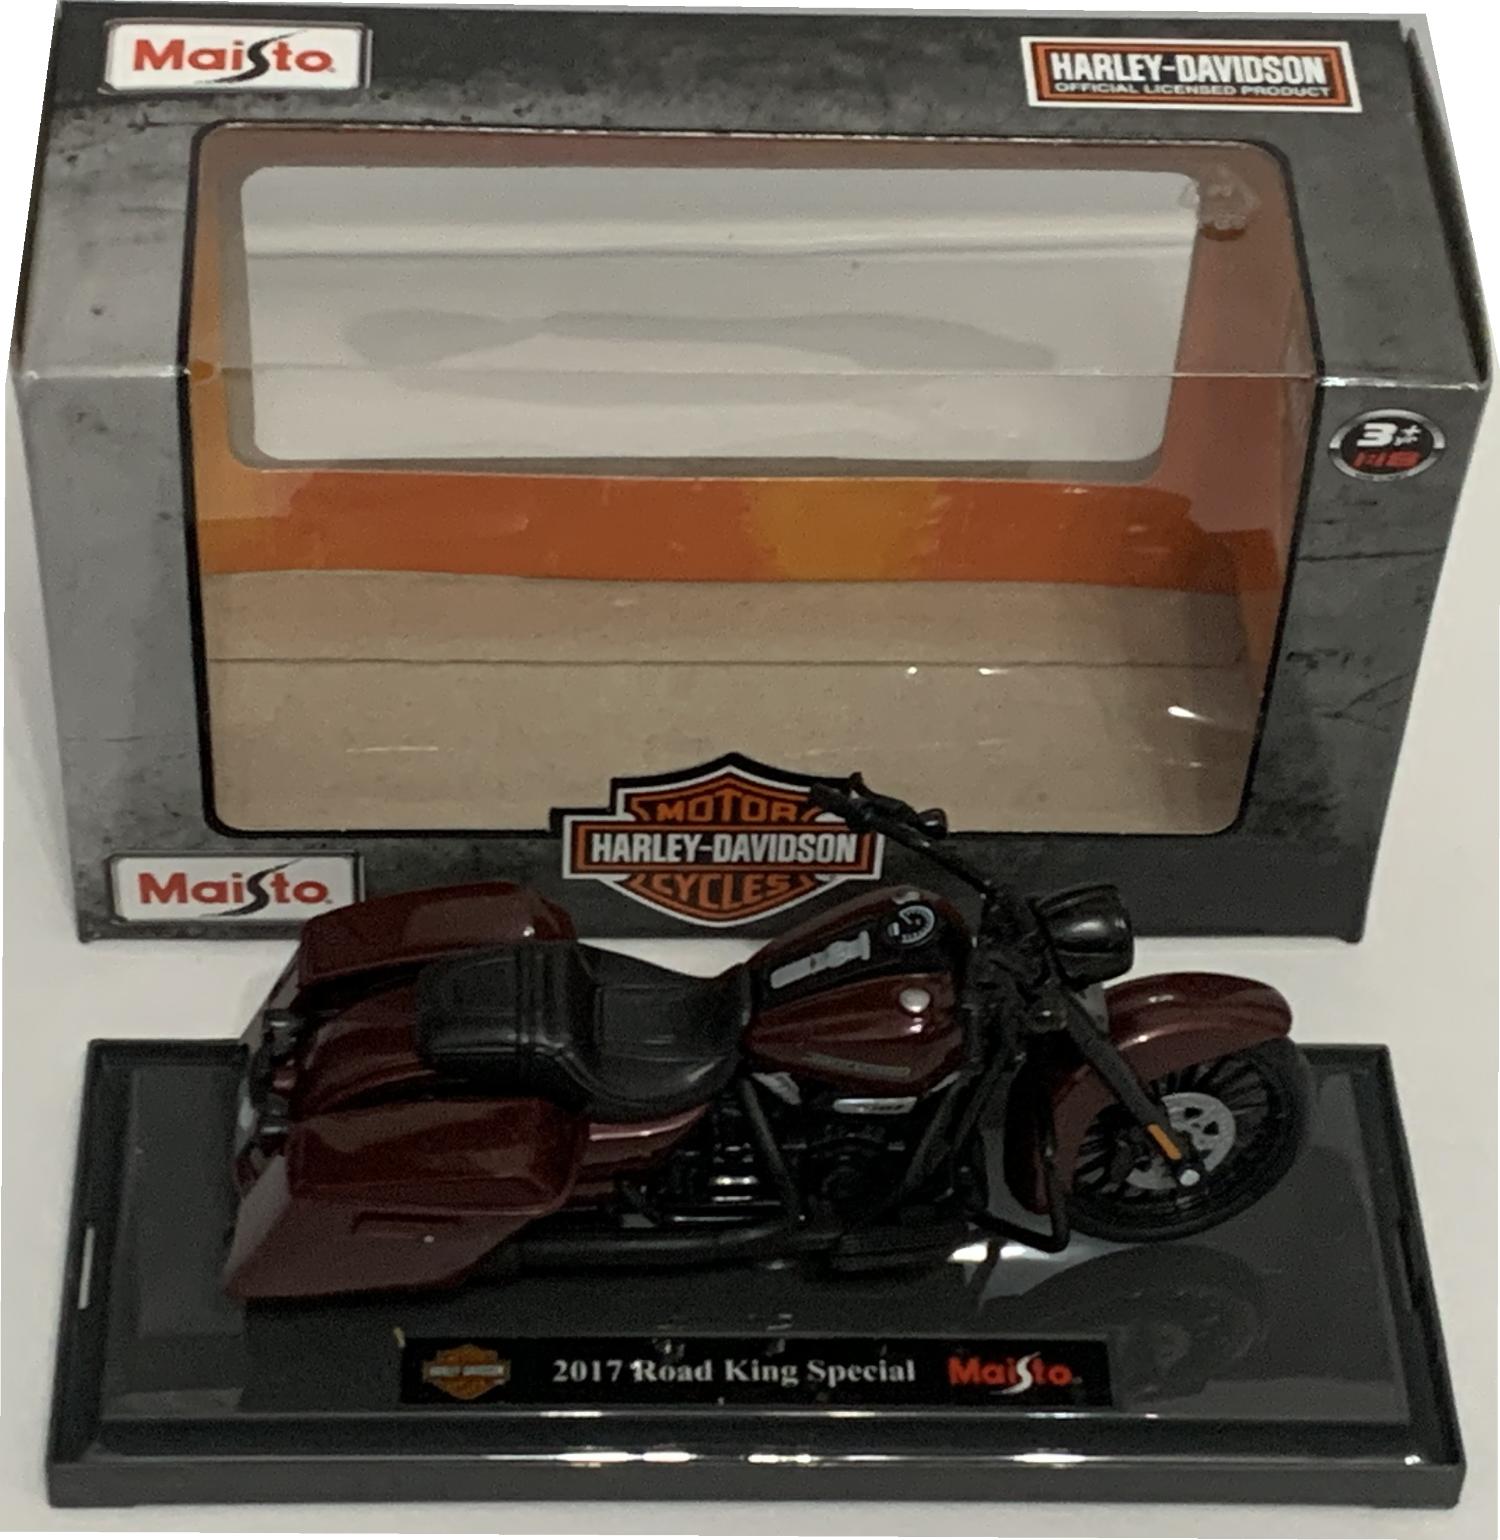 Scale: 1:18 Diecast Metal with Plastic Parts (approx length 13.5 cm) Model is mounted on a removable plinth and presented in a Harley Davidson themed window display box